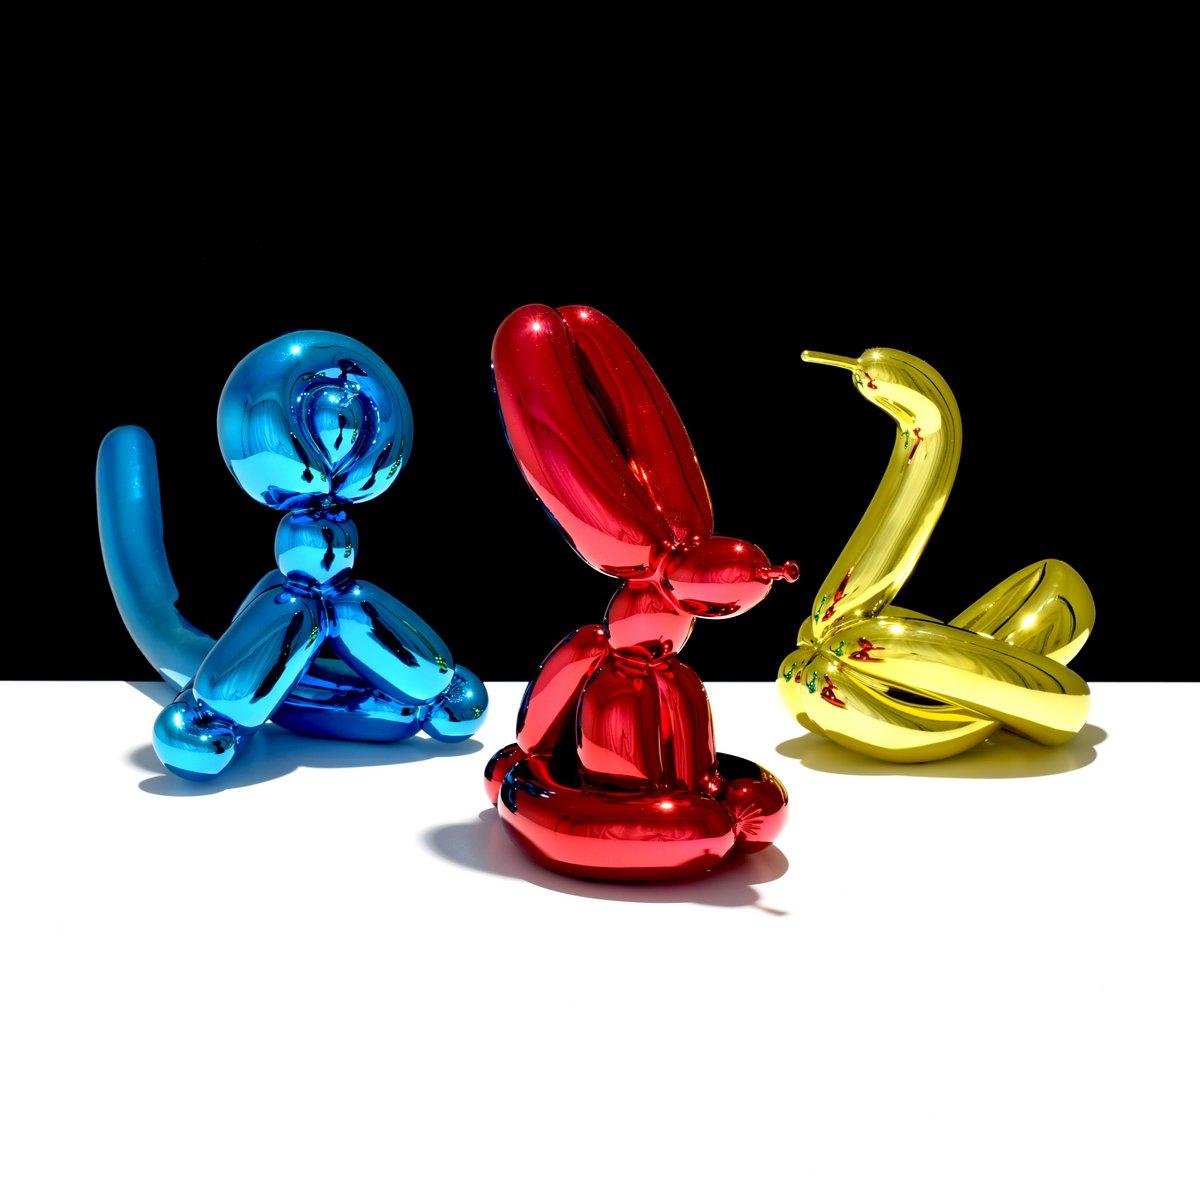 French Jeff Koons Balloon Rabbit/Monkey/Swan Sculptures, Set of 3 For Sale